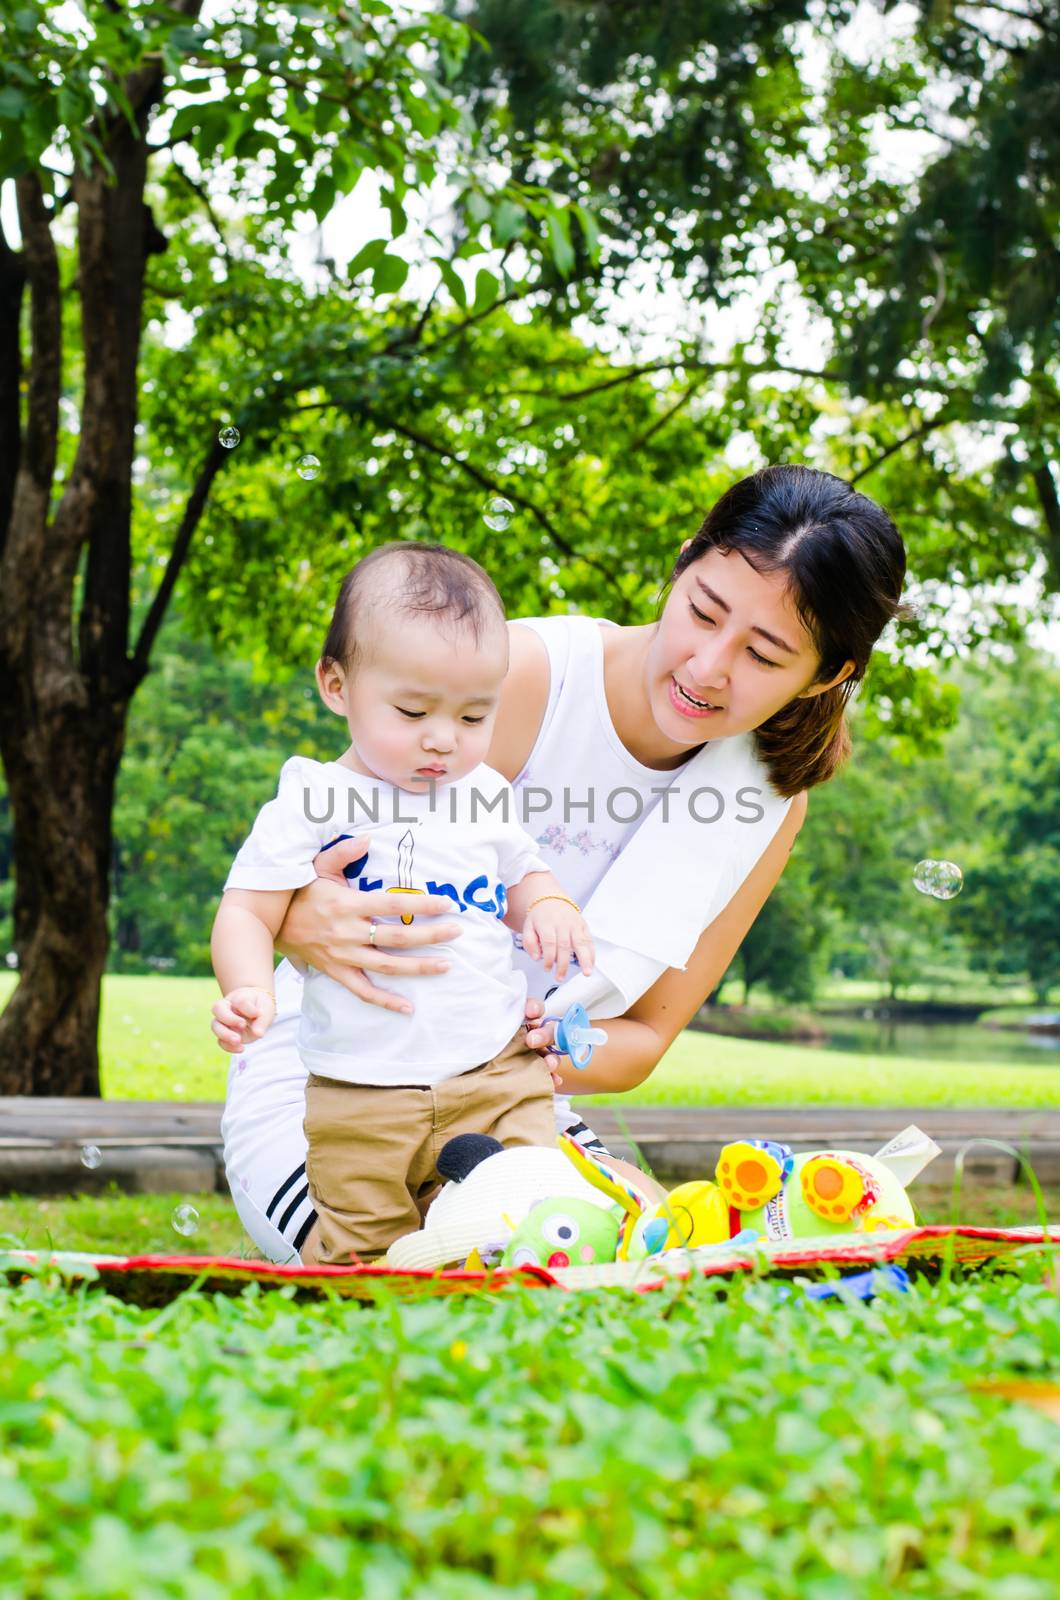 Mother and baby in park, portrait.